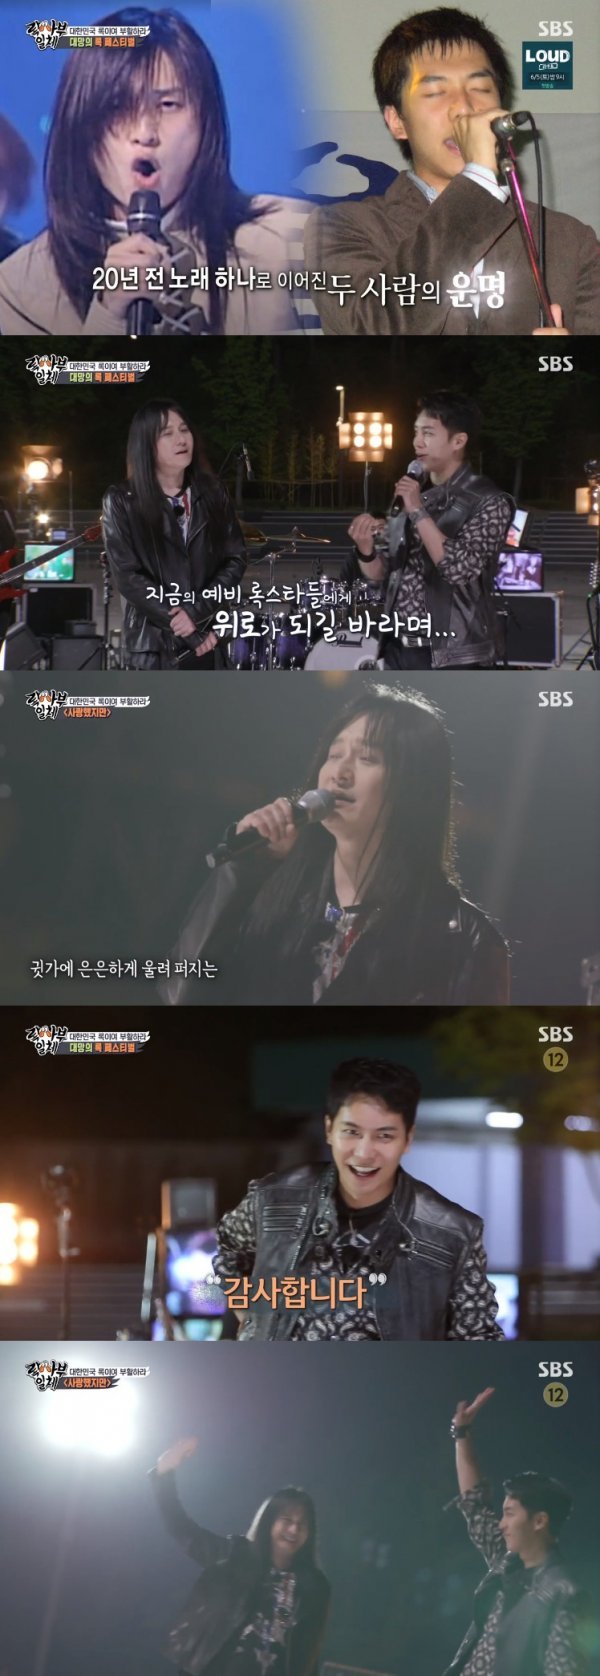 On the 23rd SBS All The Butlers, Kim Tae-won, Kim Kyung-ho and Park Wan-kyu appeared as masters.They decided to prepare an untapped stage for K-Rock Risen.To the masters who will tell the Rockers all the secrets, Lee Seung-gi said, If you Rocker, do not you have a fitting and props?Its leather jackets, sunglasses, long hair, said Jung Eun-woo, who asked, How do you manage your hair?Park Wan-kyu responded firmly, saying, Rockers do not share hair management laws.I want to keep my hair richer and longer alone, because this is a survival strategy, he added, laughing.Kim Kyung-ho said: I have only three things: I need a strabismus fan, I need to dry with cold wind, and hair loss shampoo. Its important how much content it has.Im dyed alone at home now, he said, revealing the secret.Park Wan-kyu then hesitated, saying, You shouldnt let me know this... and then said, Theres a peanut shampoo... You should use this shampoo well. Rockers are in a hurry and wash right away.I should leave it for 6 to 7 minutes. Yang Se-hyeong added, I did not shake my head, but I smelled a lot of complaints.The band was named The leeches. The masters also revealed secrets such as performances and facial expressions that bent the audience.Lee Seung-gi decided to make a decision by referring to Kim Kyung-hos I Loved You and Park Wan-kyus Millennial Love as a song he wanted to do with his master.Lee Seung-gi was immersed with all her heart, and Kim Kyung-ho praised her for really singing well.Lee Seung-gi has previously expressed fanfare that Idol was Kim Kyung-ho in high school; a generation that grew up listening to Kim Kyung-hos rock.Kim Dong-Hyun and Cha Jung Eun-woo chose Risens Never Ending Kahaani, while Yang Se-hyeong practiced Bon Jovis lts my life.Yang Se-hyeong caught the eye of the inherent rock star atmosphere.The leech band then stood in front of the camera.Lee Seung-gi explained why he held the performance on the day, saying, Many people are very hard, as the performance industry is almost devastated by Corona 19.Kim Tae-won cheered the bands, saying: Those who play music need to be loved to get energy - please, please, please, you Risen.Kim Kyung-ho and Park Wan-kyu properly exploded the rock spirit sealed with Shout, and Kim Tae-won showed off his guitar skills with 4.1.9 Elephant Escape.Park Wan-kyu, Jung Eun-woo, Kim Dong-Hyuns Never Ending Kahaani, Yang Se-hyeong, who turned into a brewing cost, and Park Wan-kyus lts my life stage.